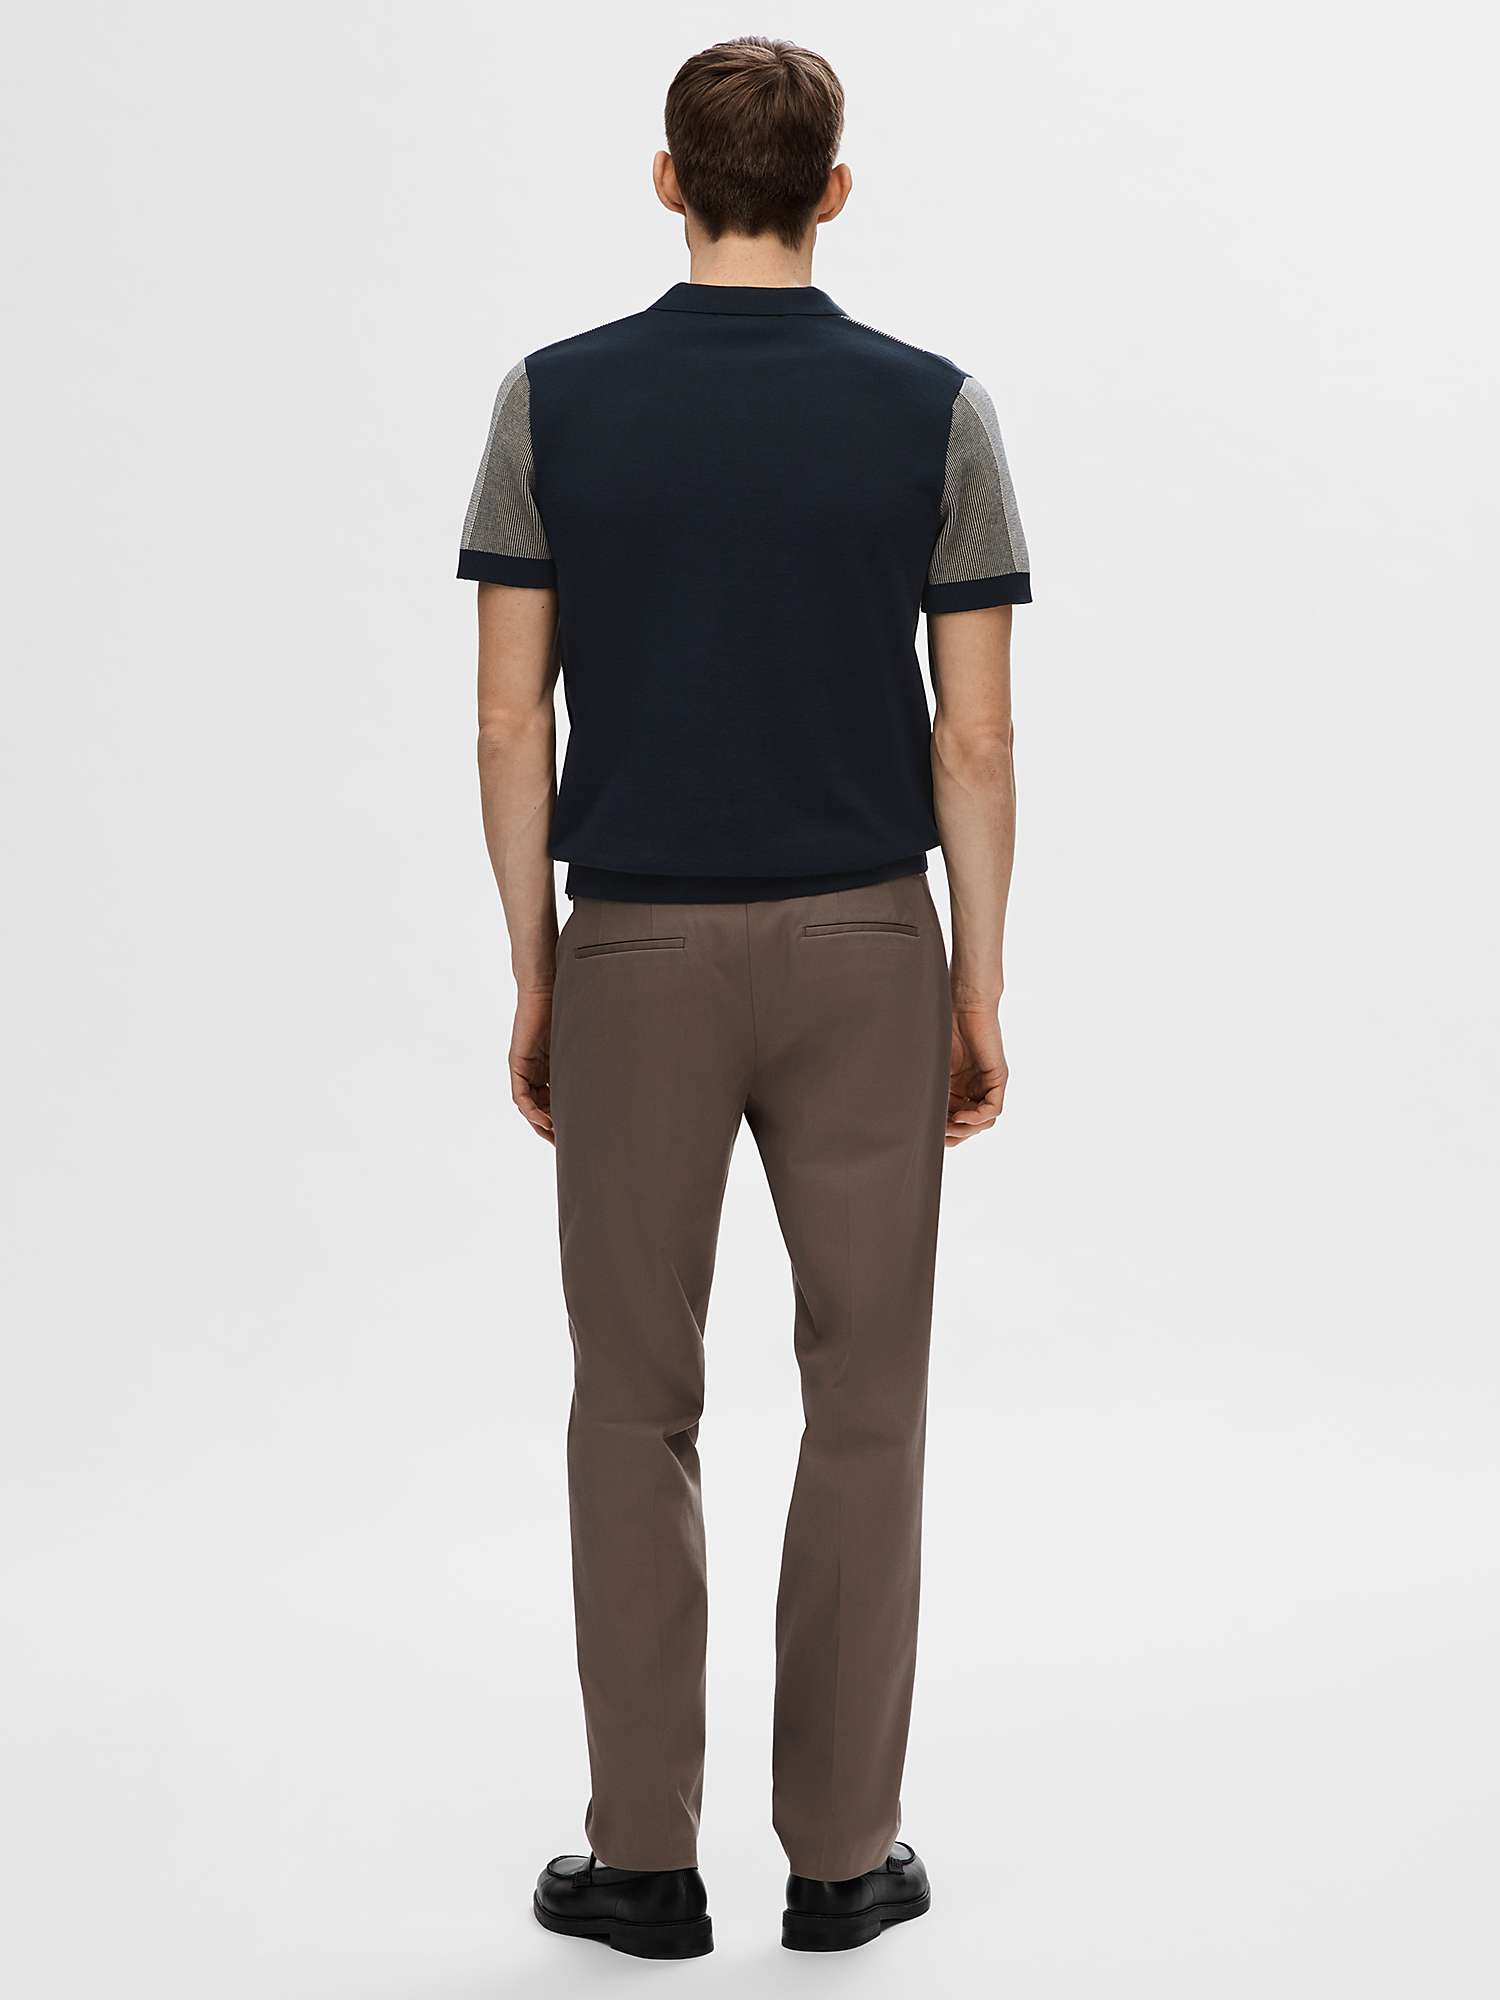 Buy SELECTED HOMME Wide Stripe Polo Shirt, Sky Captain Online at johnlewis.com